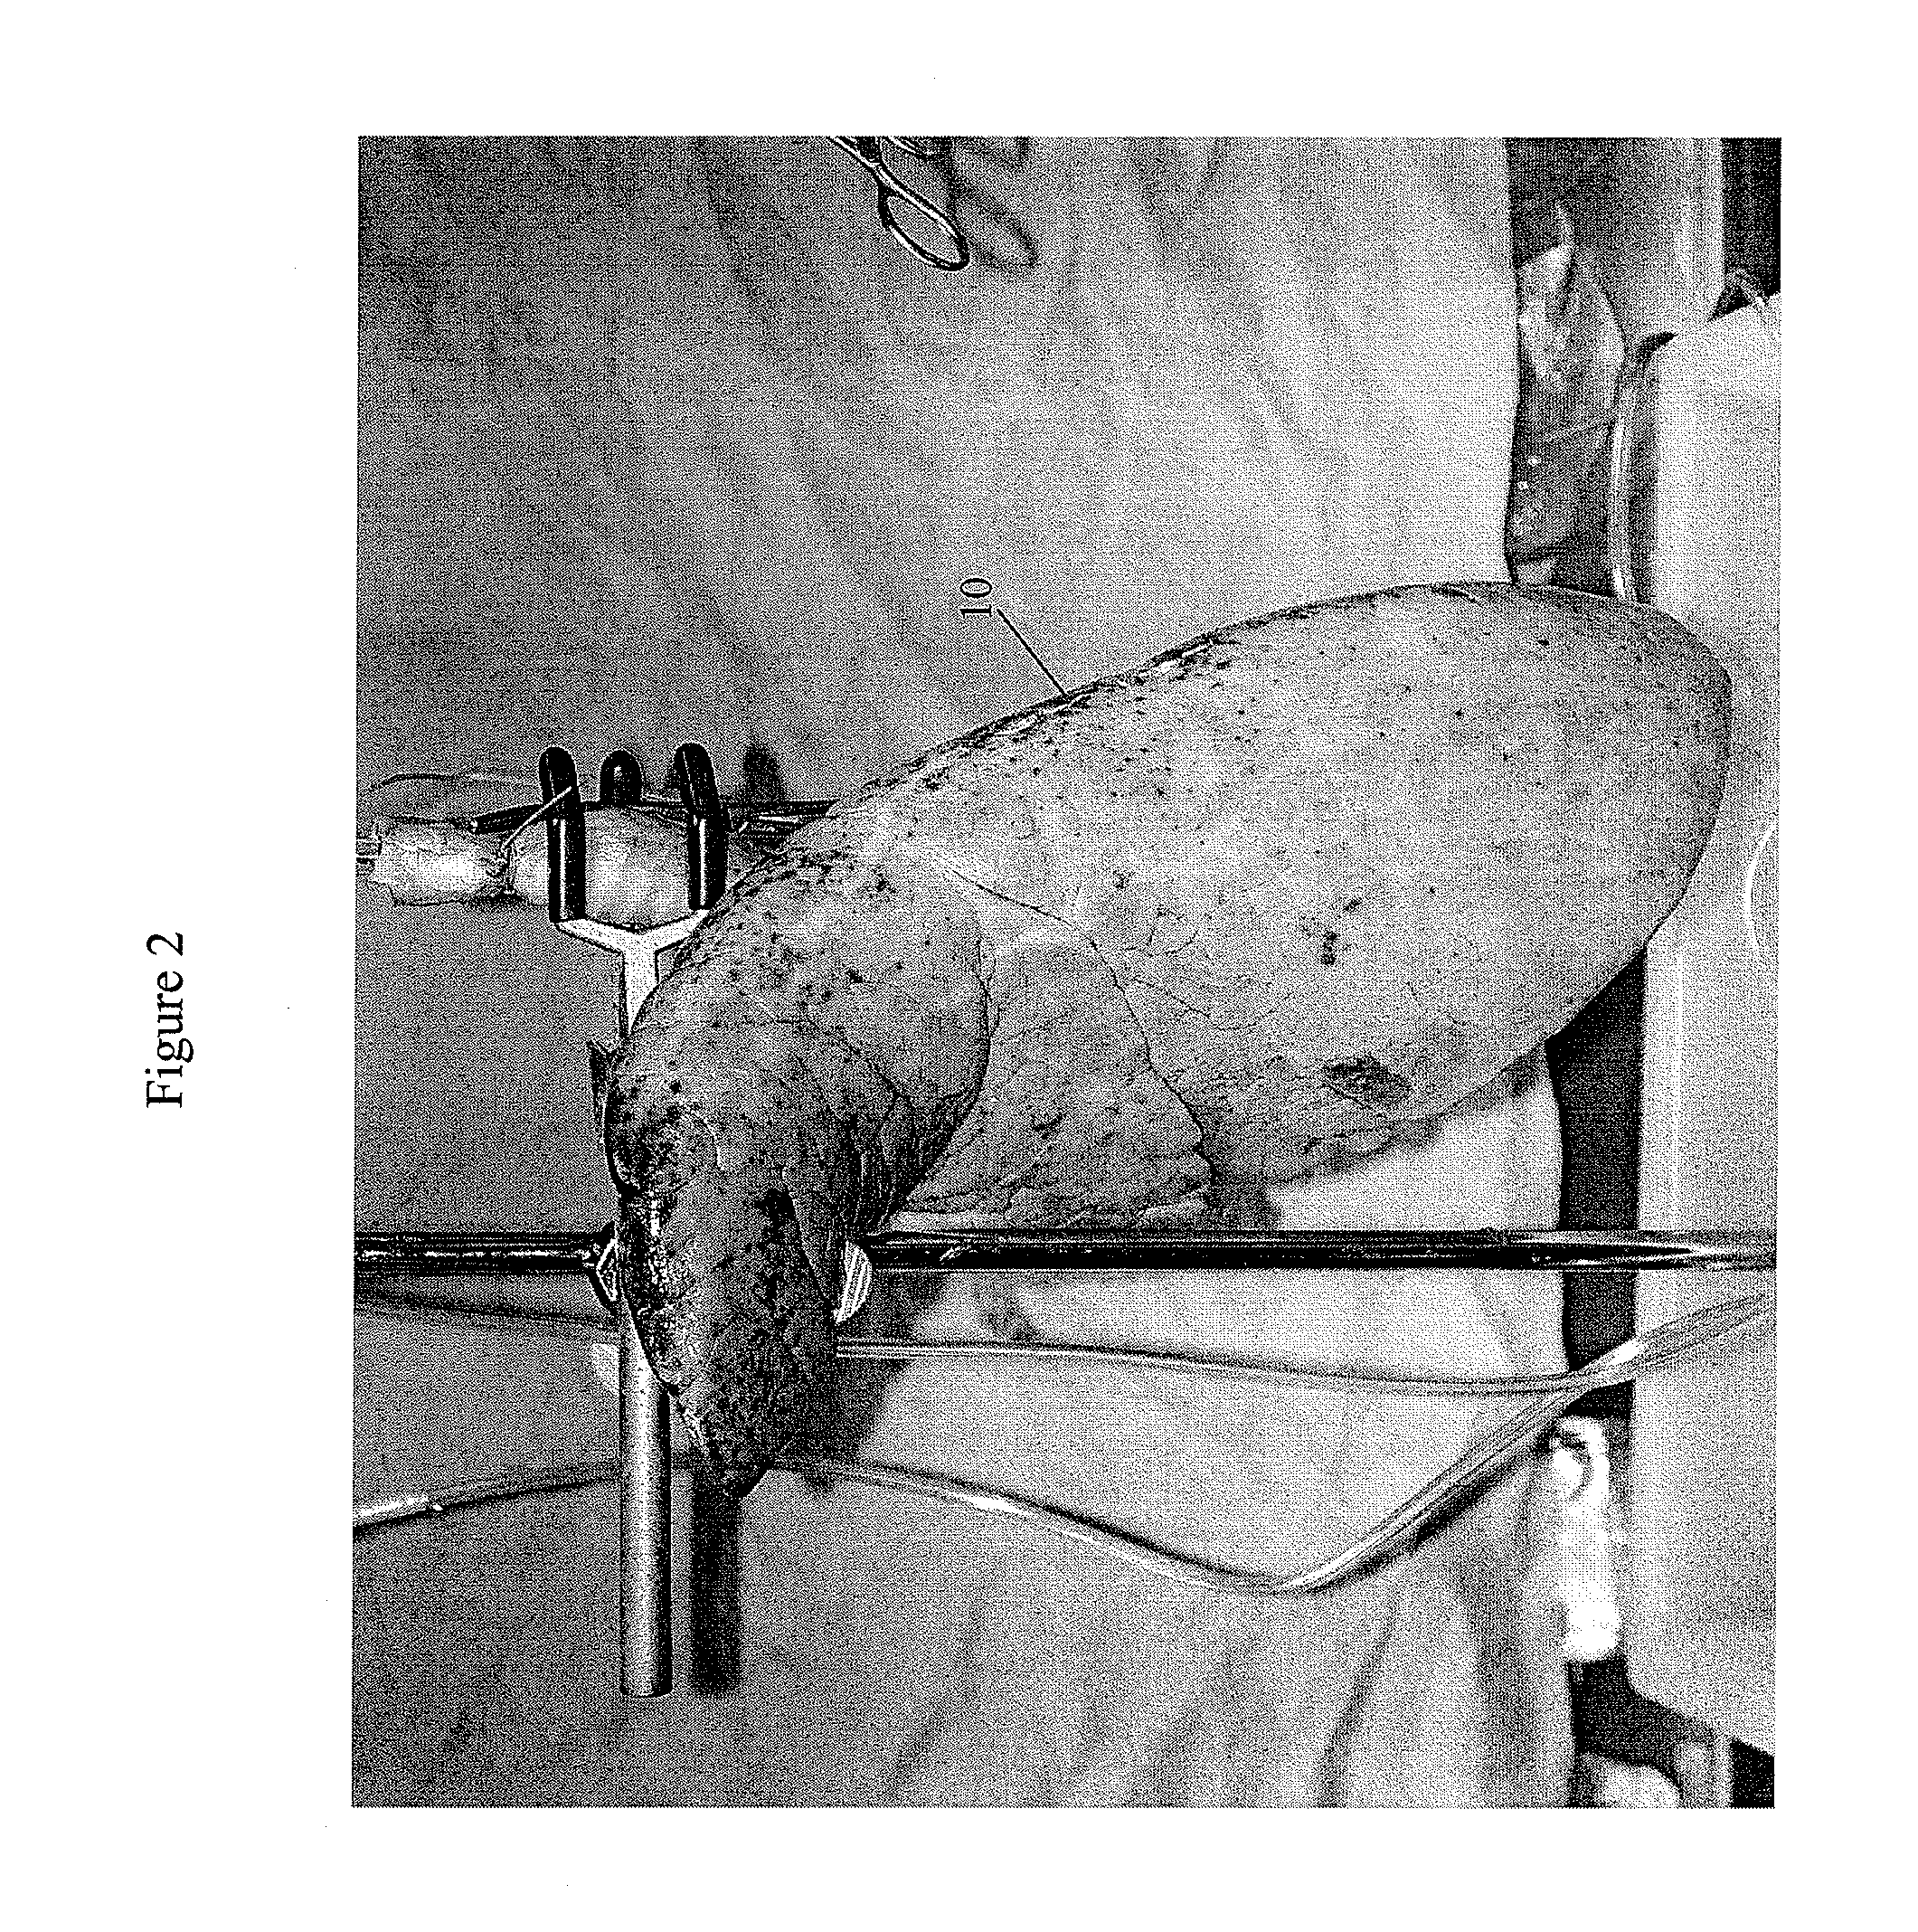 System and method for detection and repair of pulmonary air leaks